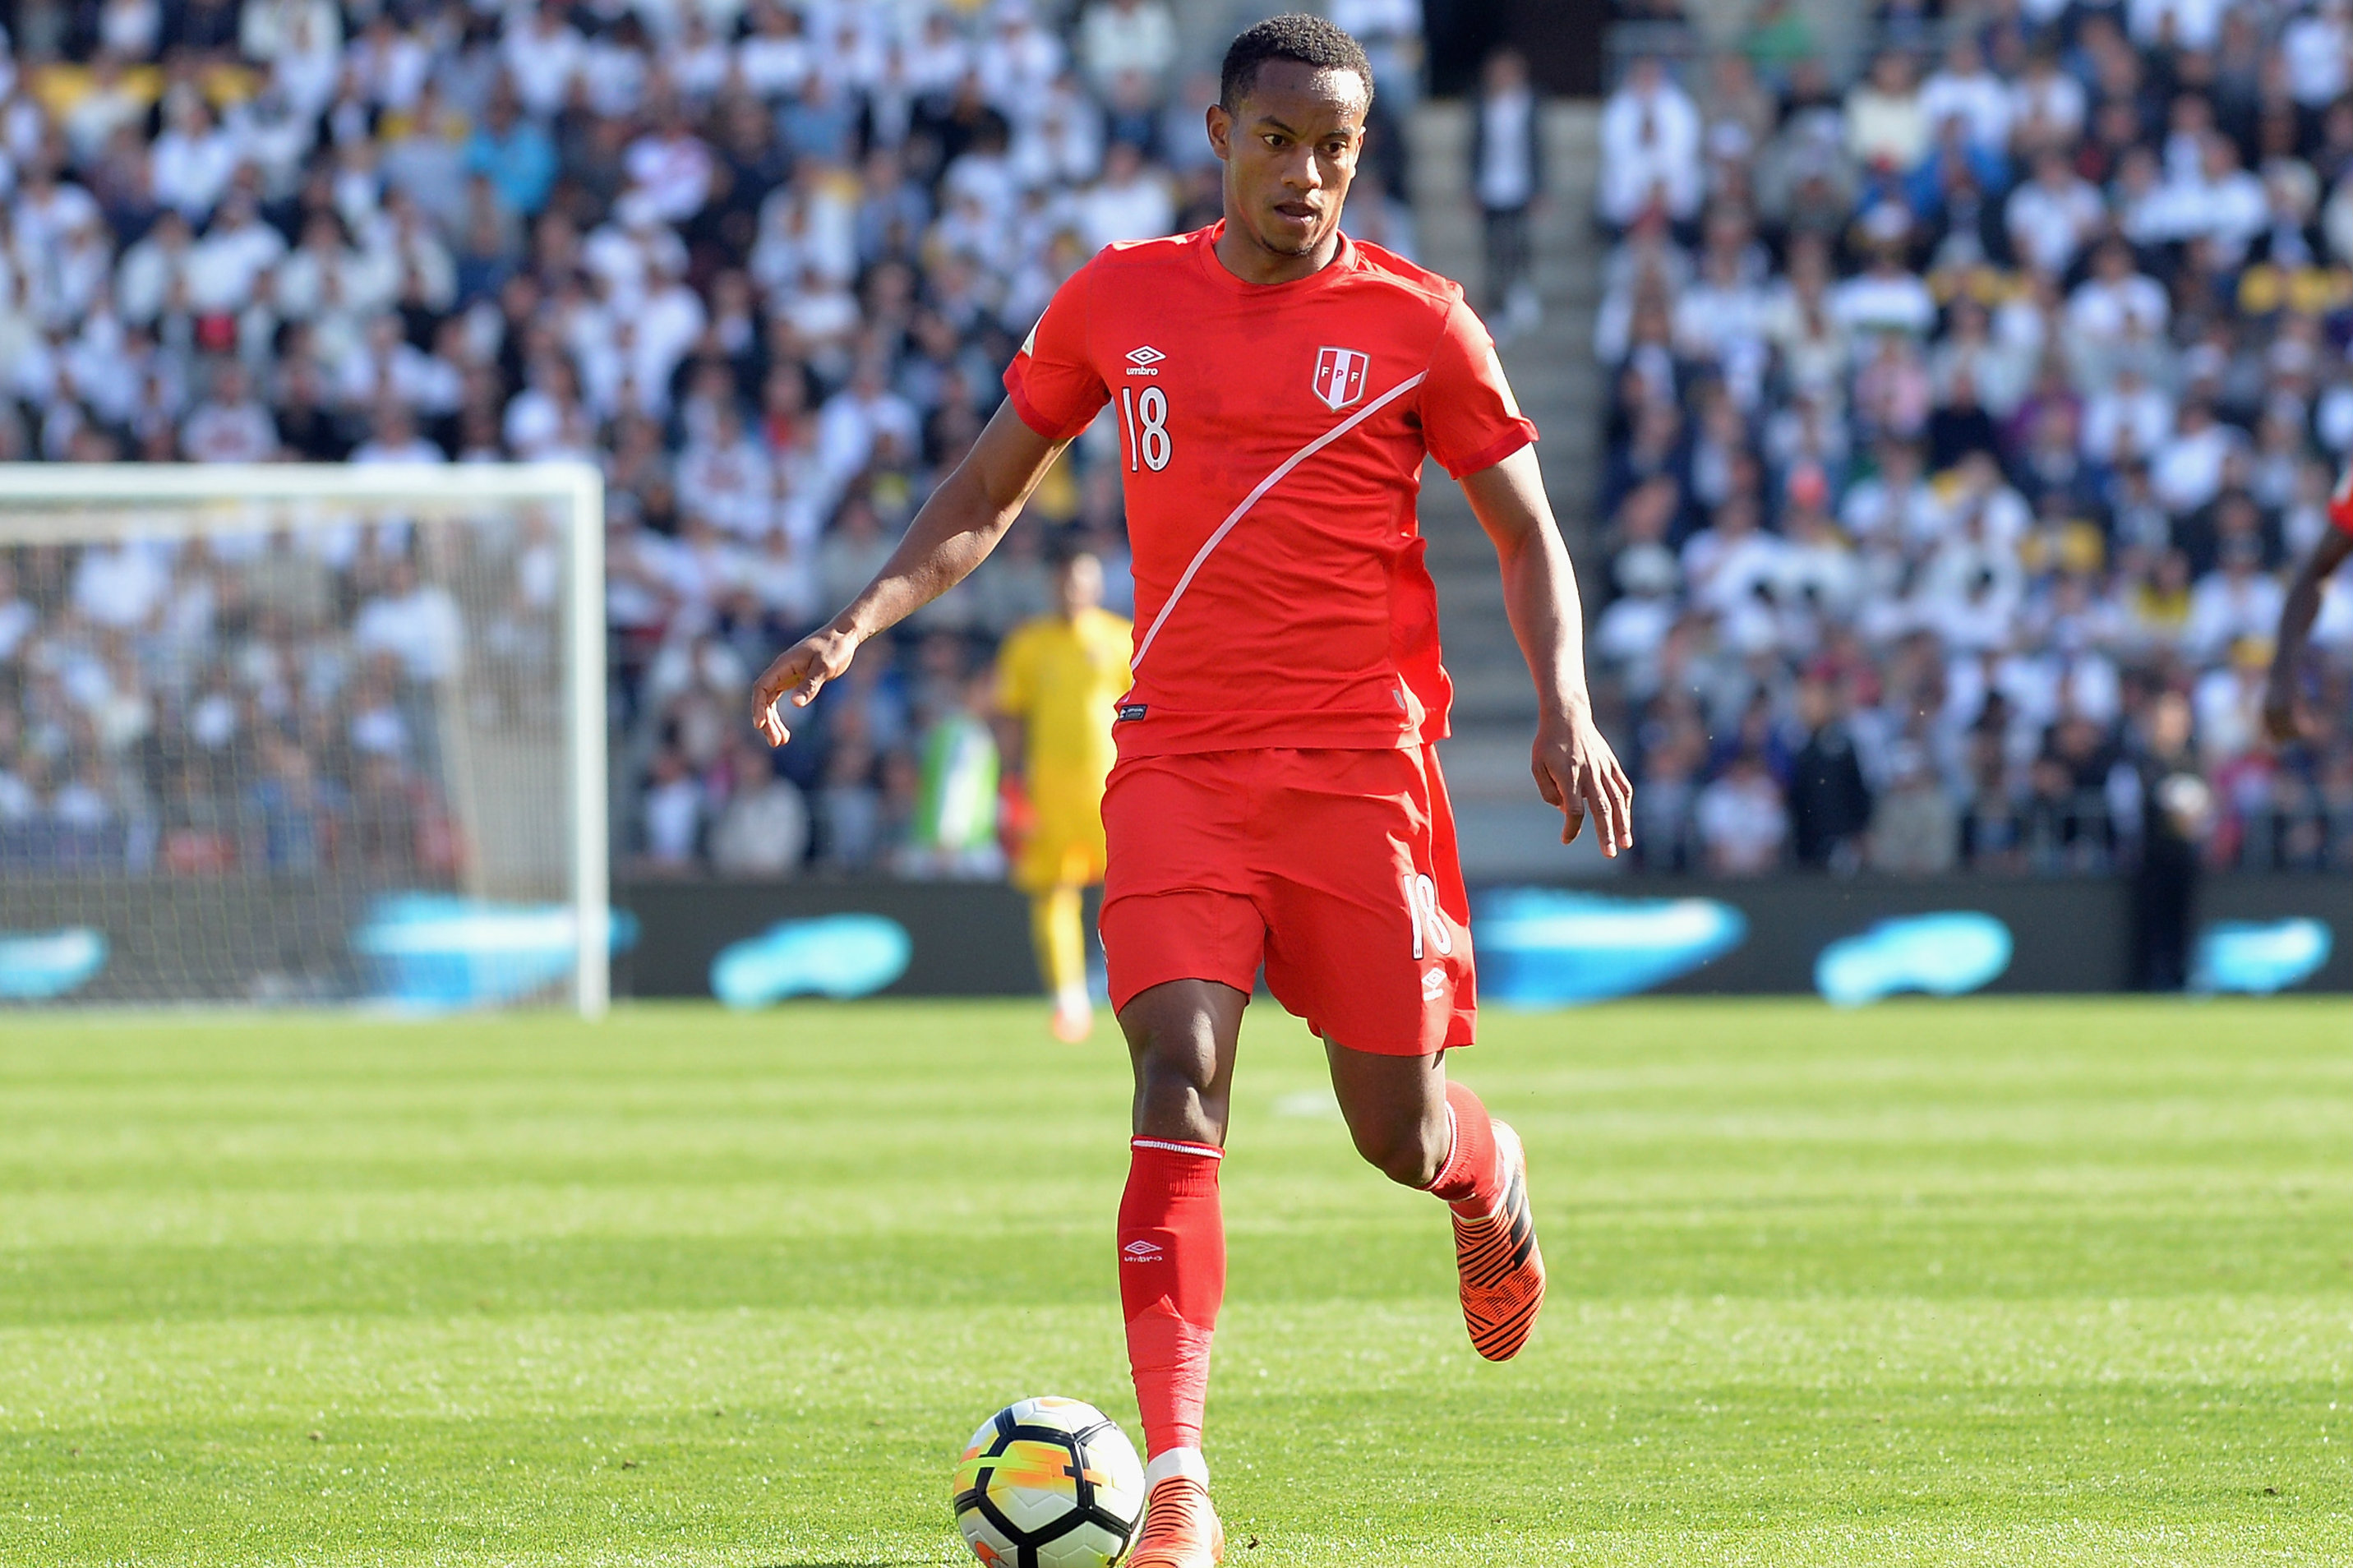 Andre Carrillo brings Premier League experience to Peru's talented squad.